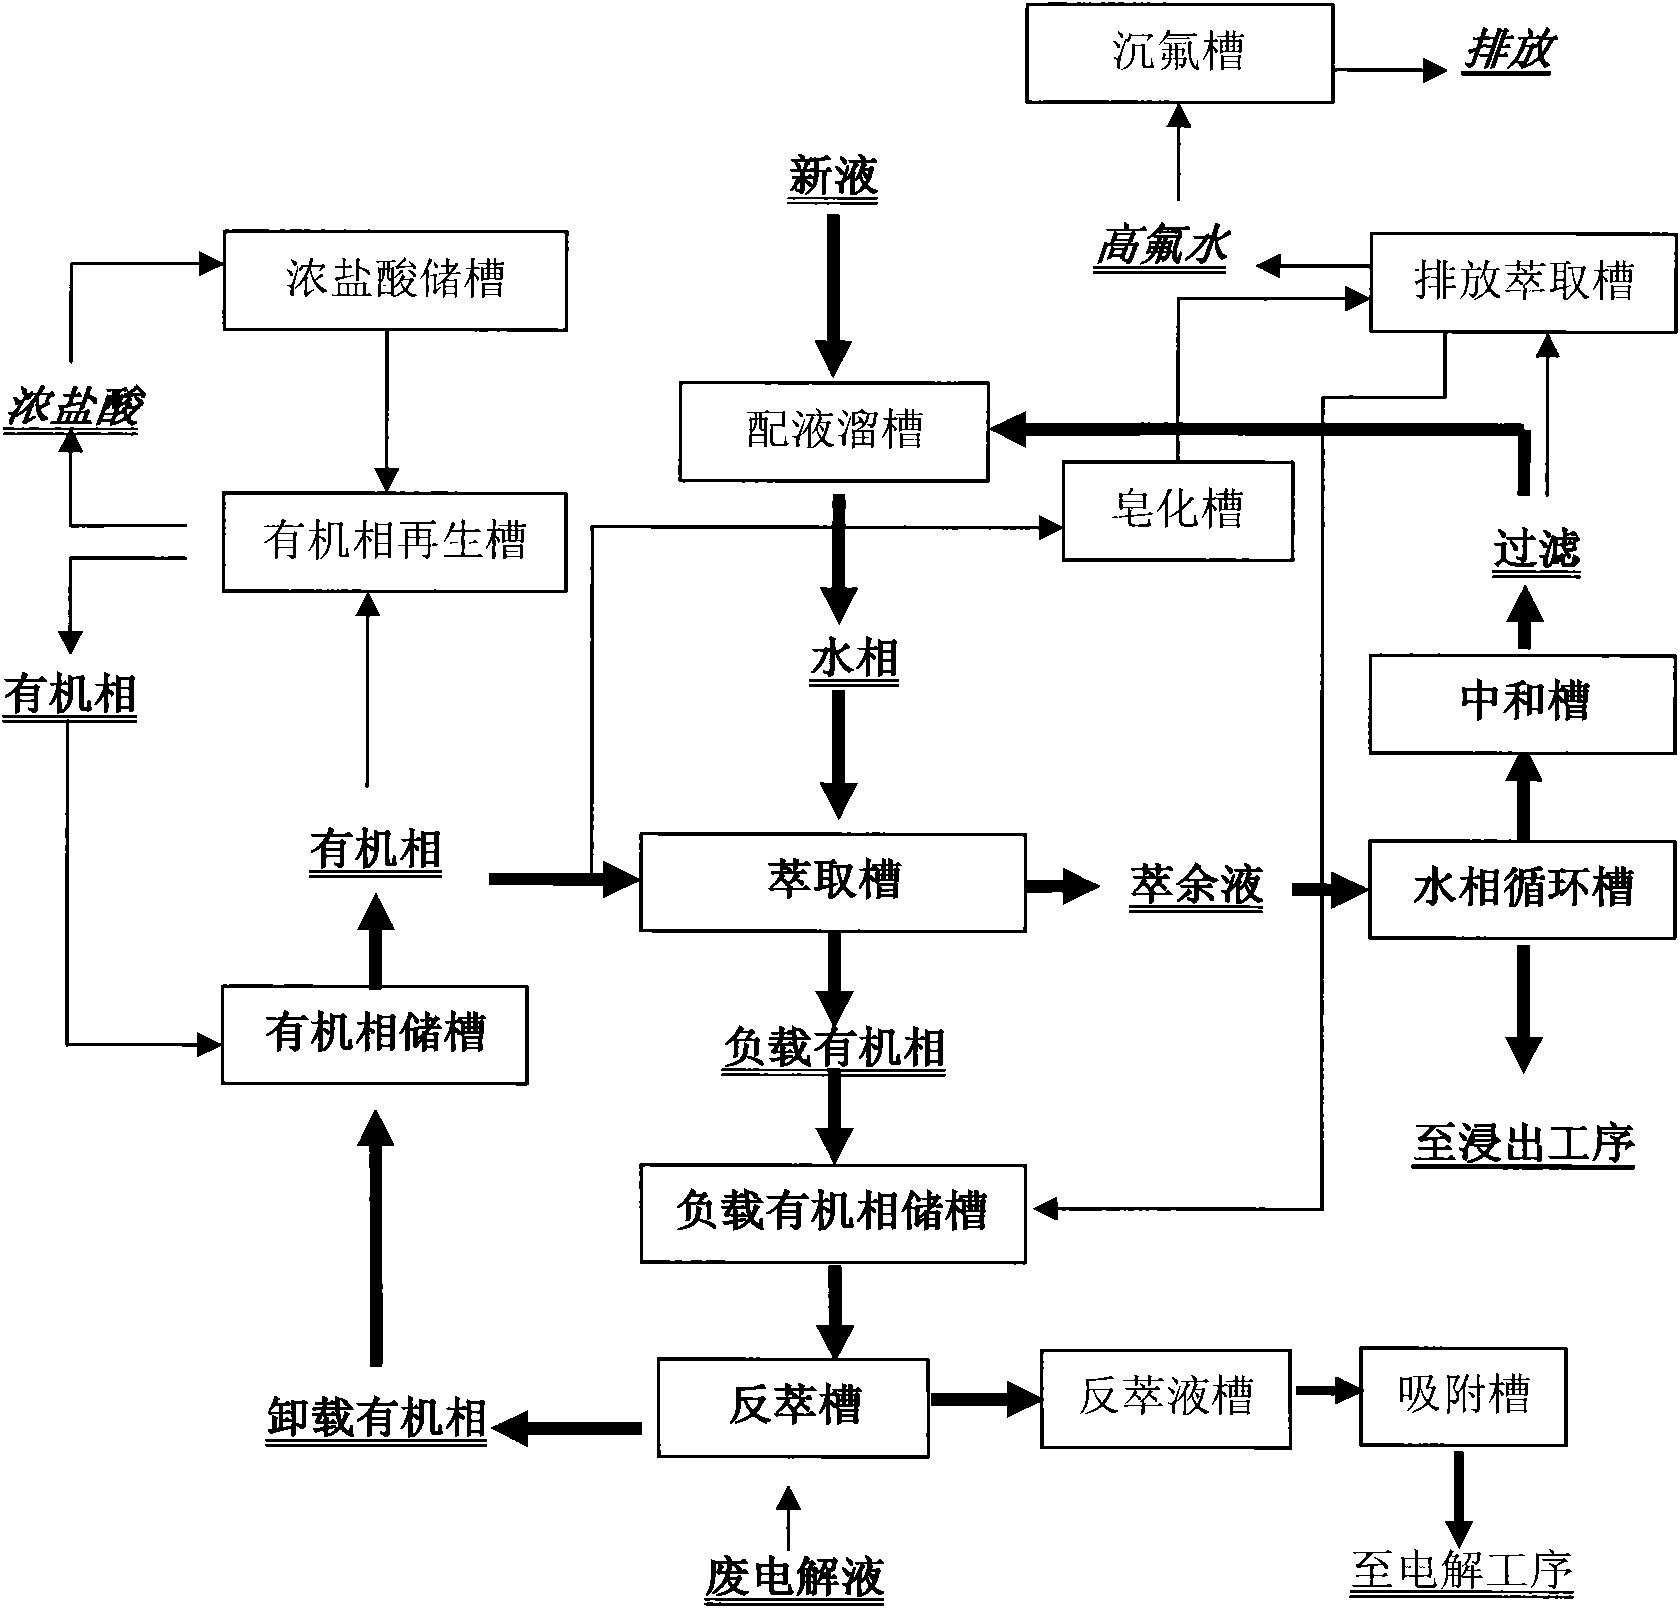 Production process for isolating fluorine and chlorine by acid extraction during electrolytic zinc production